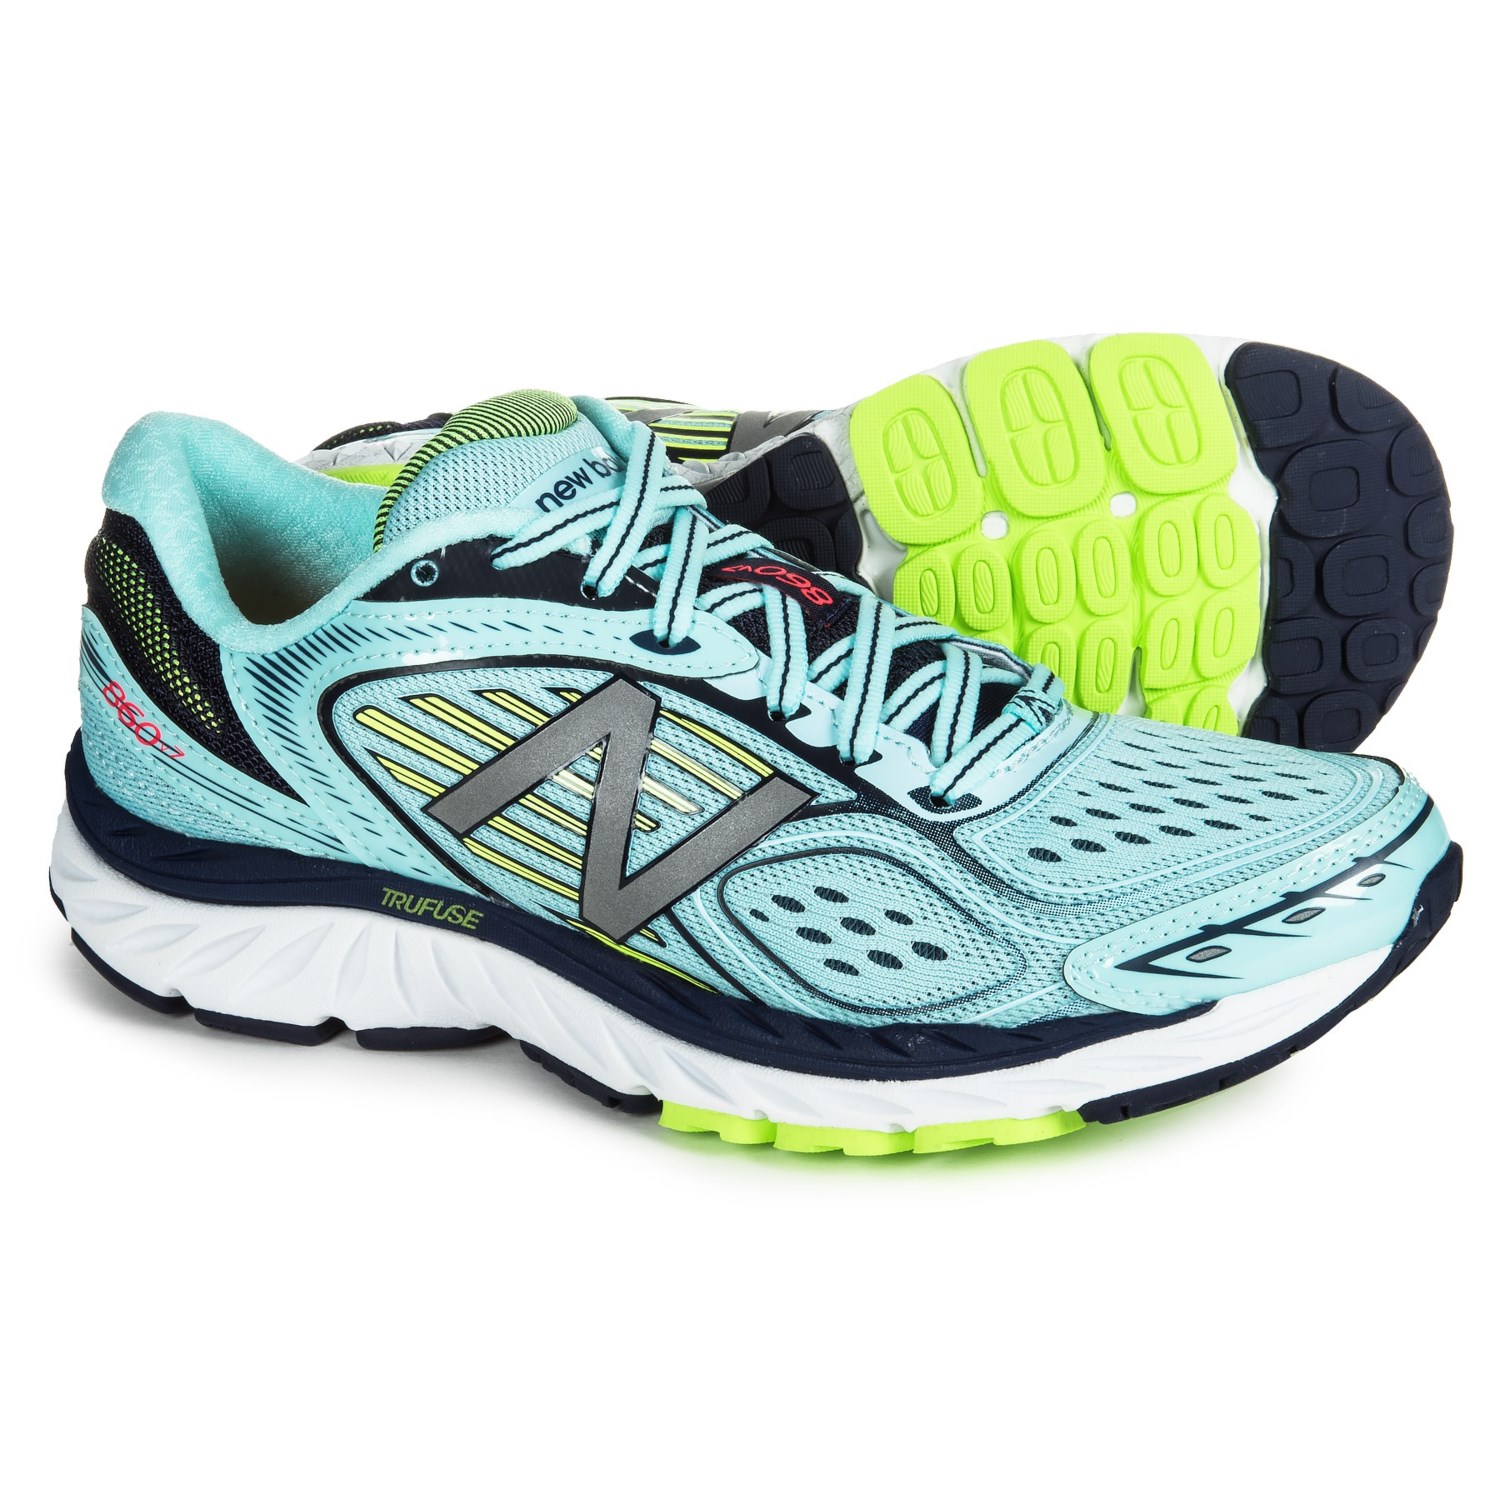 New Balance 860v7 Running Shoes (For Women) Save 43